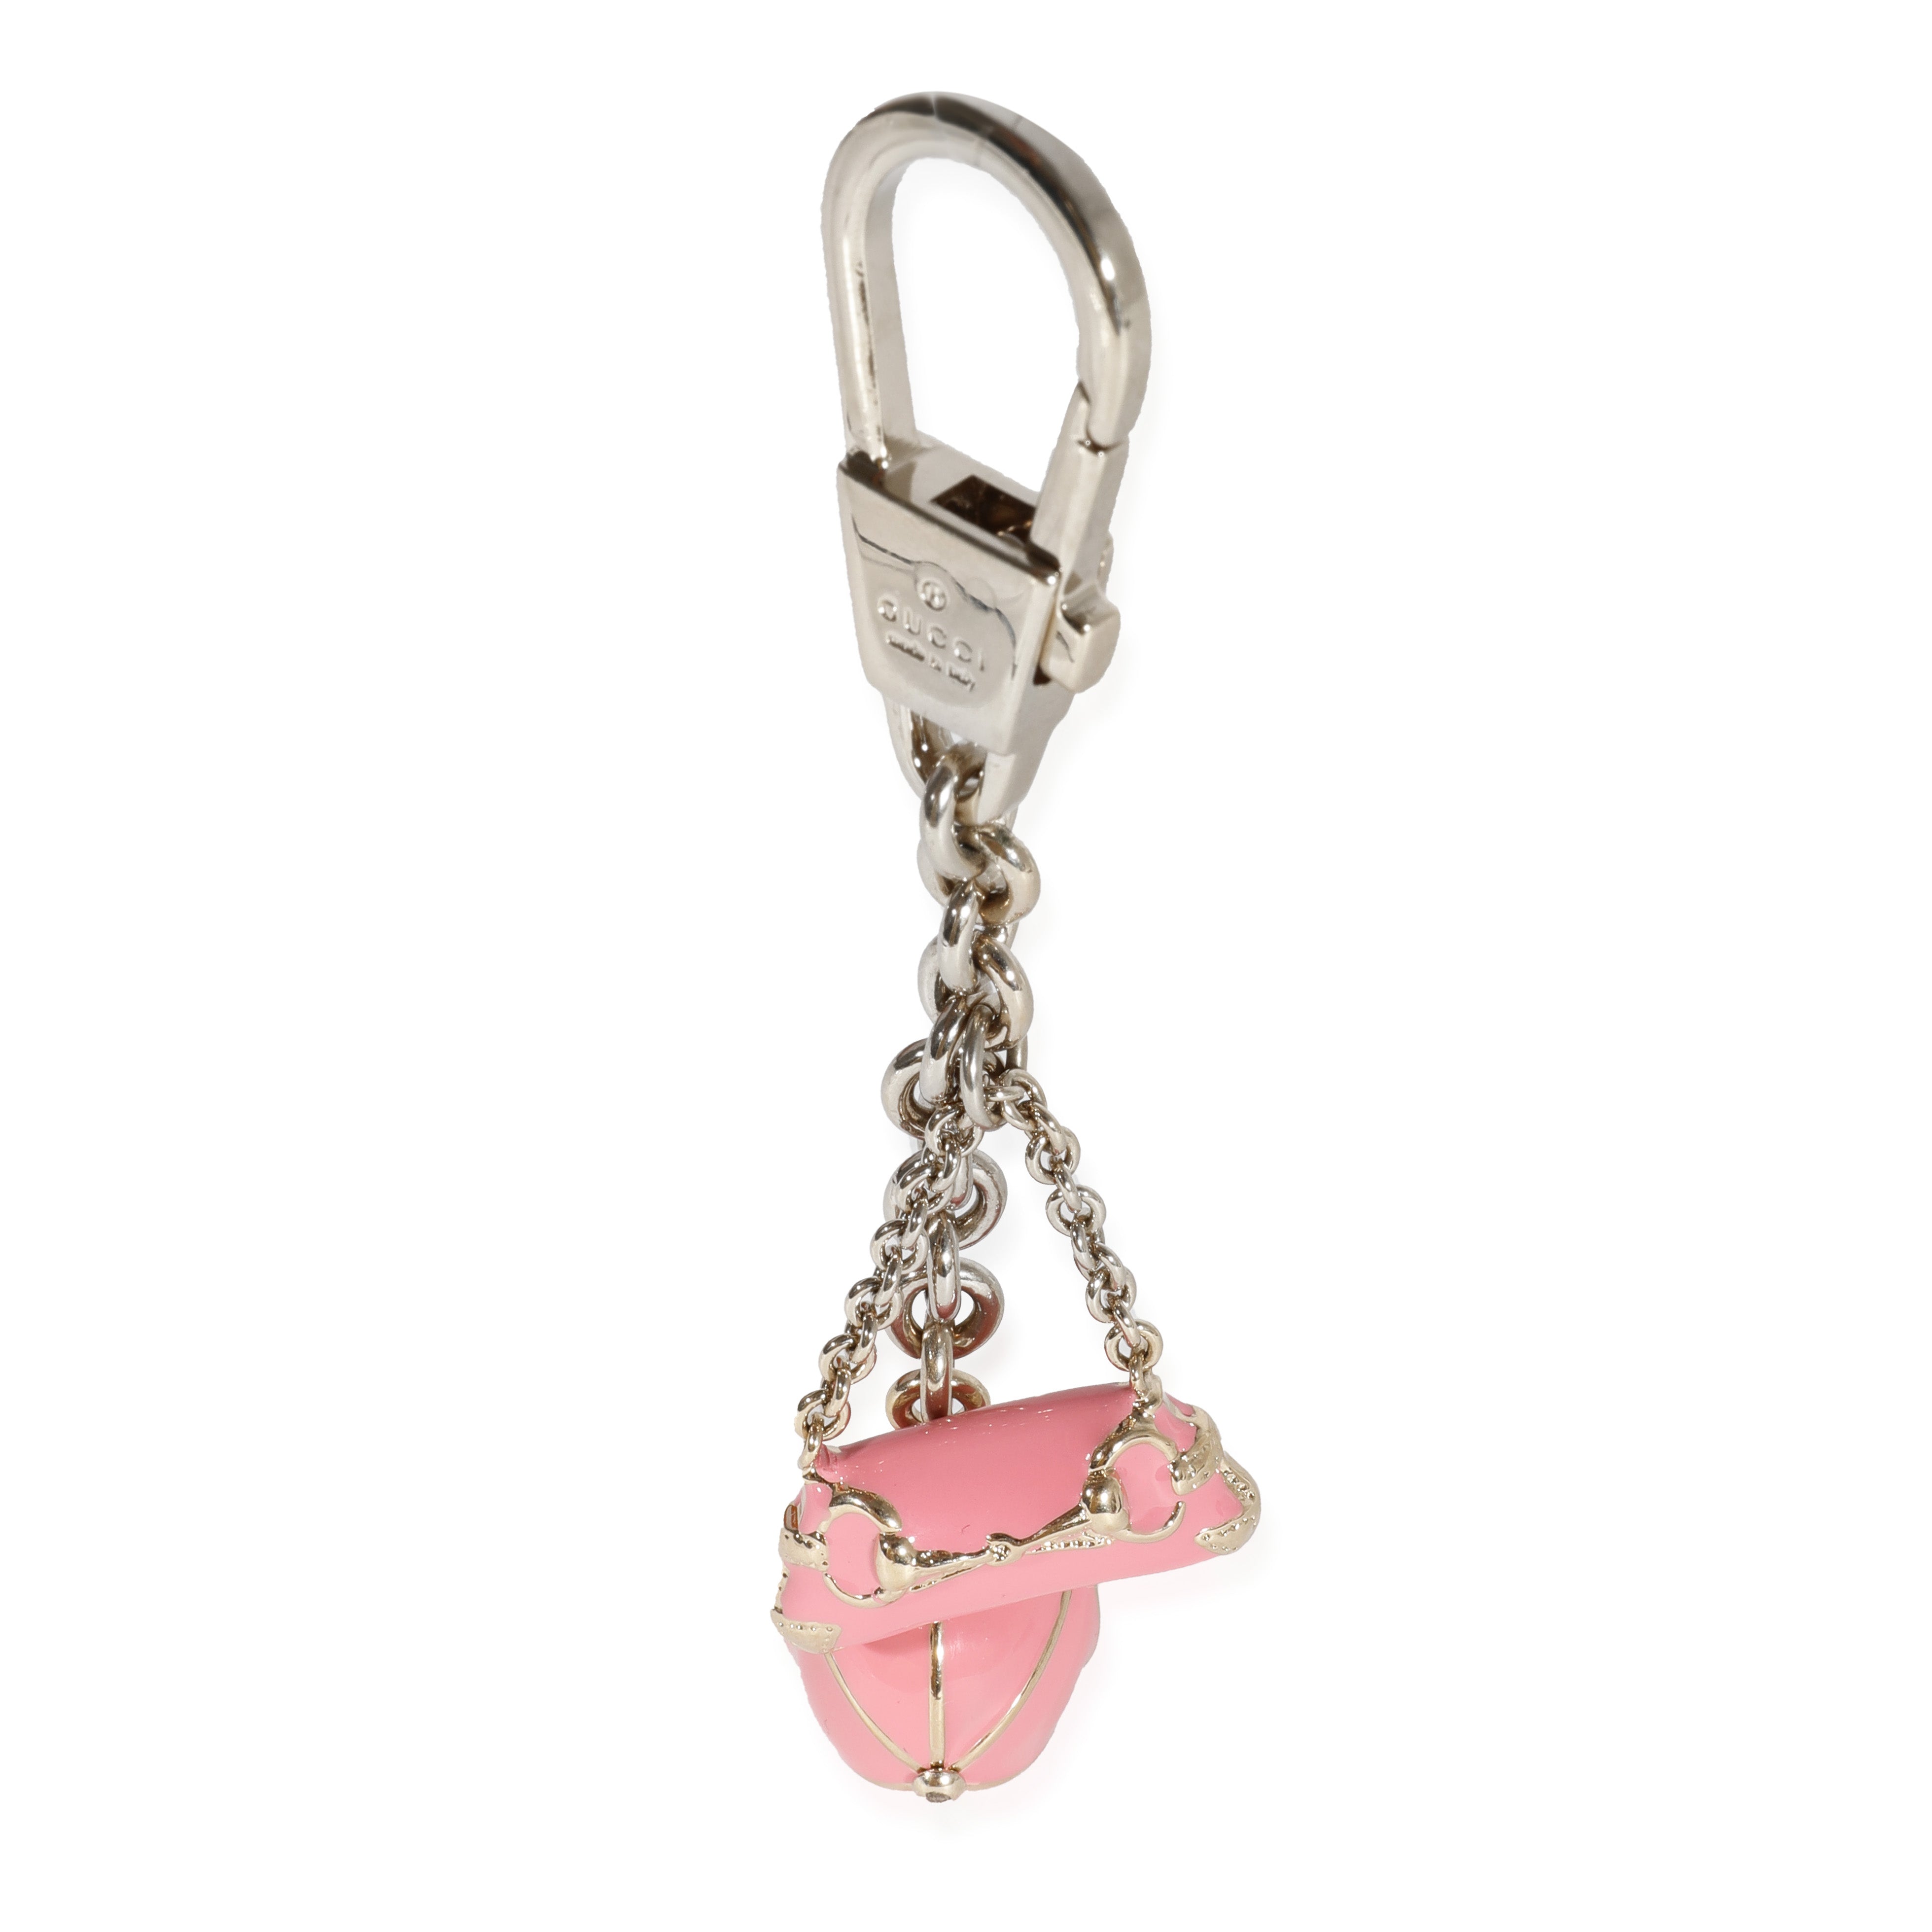 Hermes Womens Keychains & Bag Charms, Pink